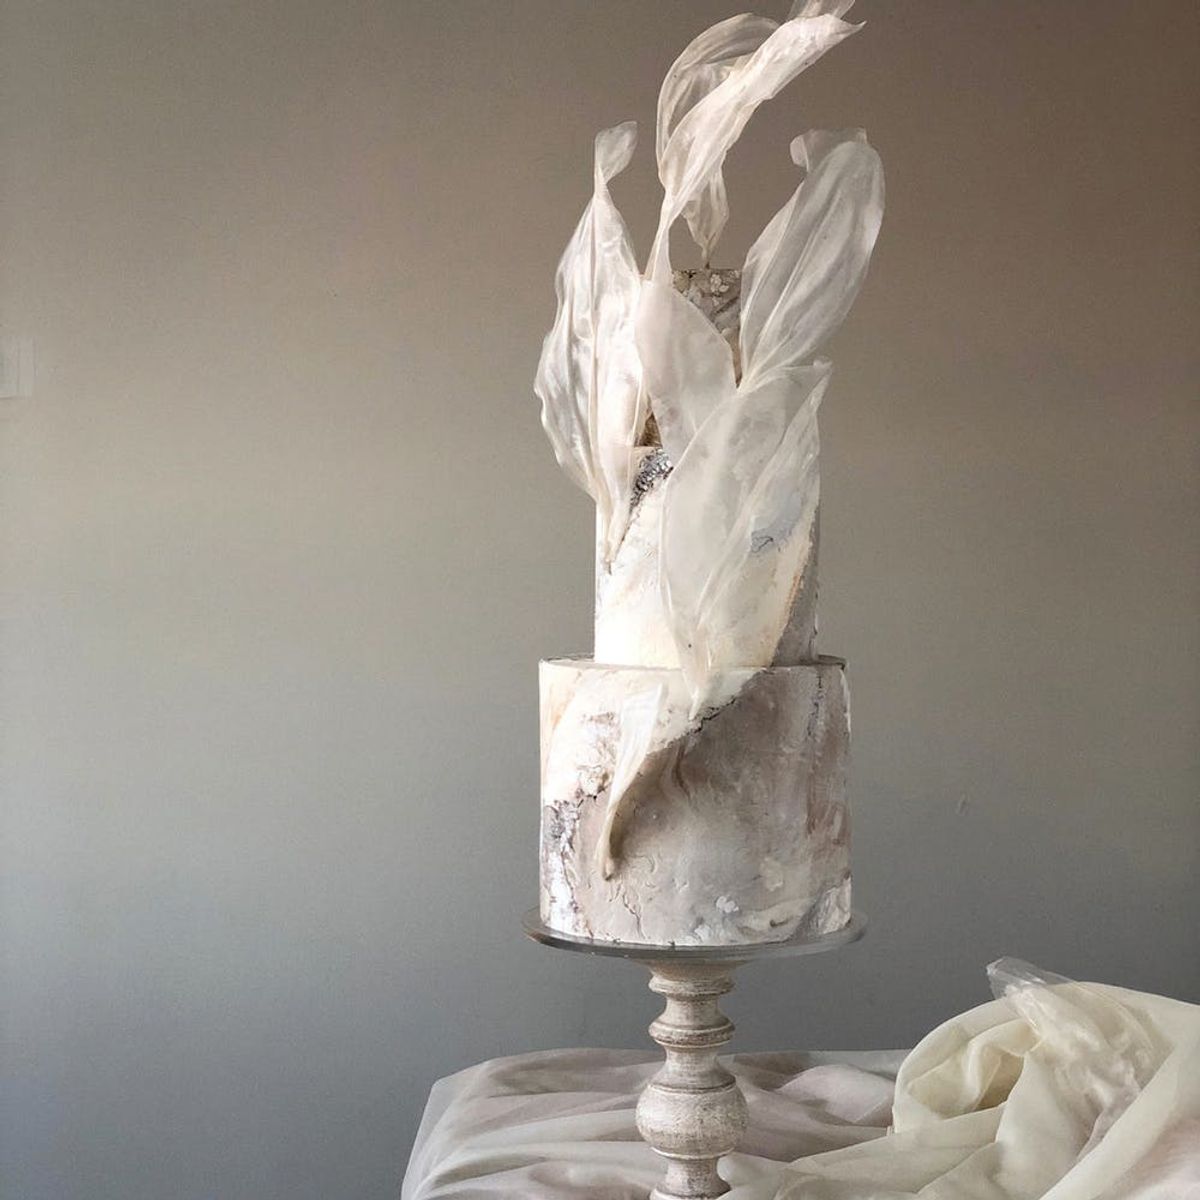 This Baker’s Sculptural Wedding Cakes Defy The Laws Of Physics In The Prettiest Way